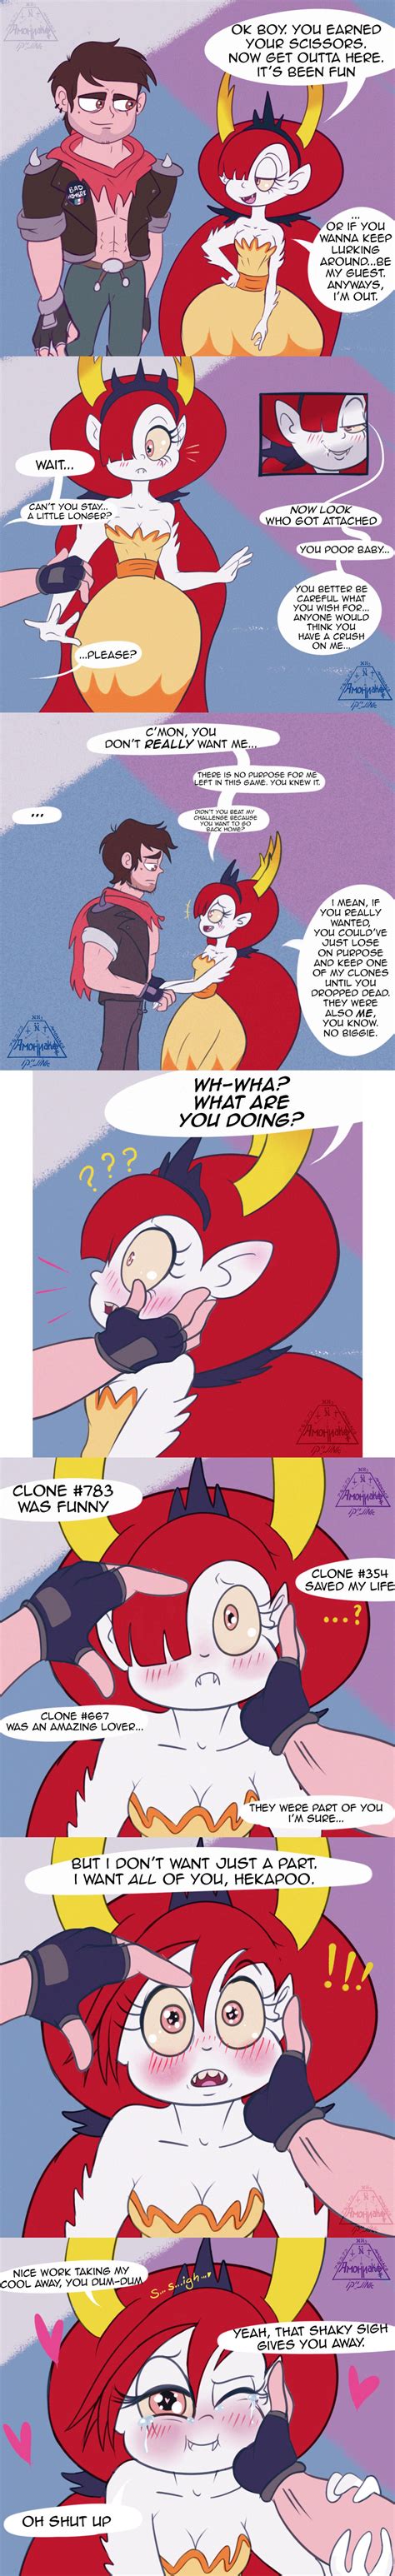 Hekapoo Just Wants To Be Happy Star Vs The Forces Of